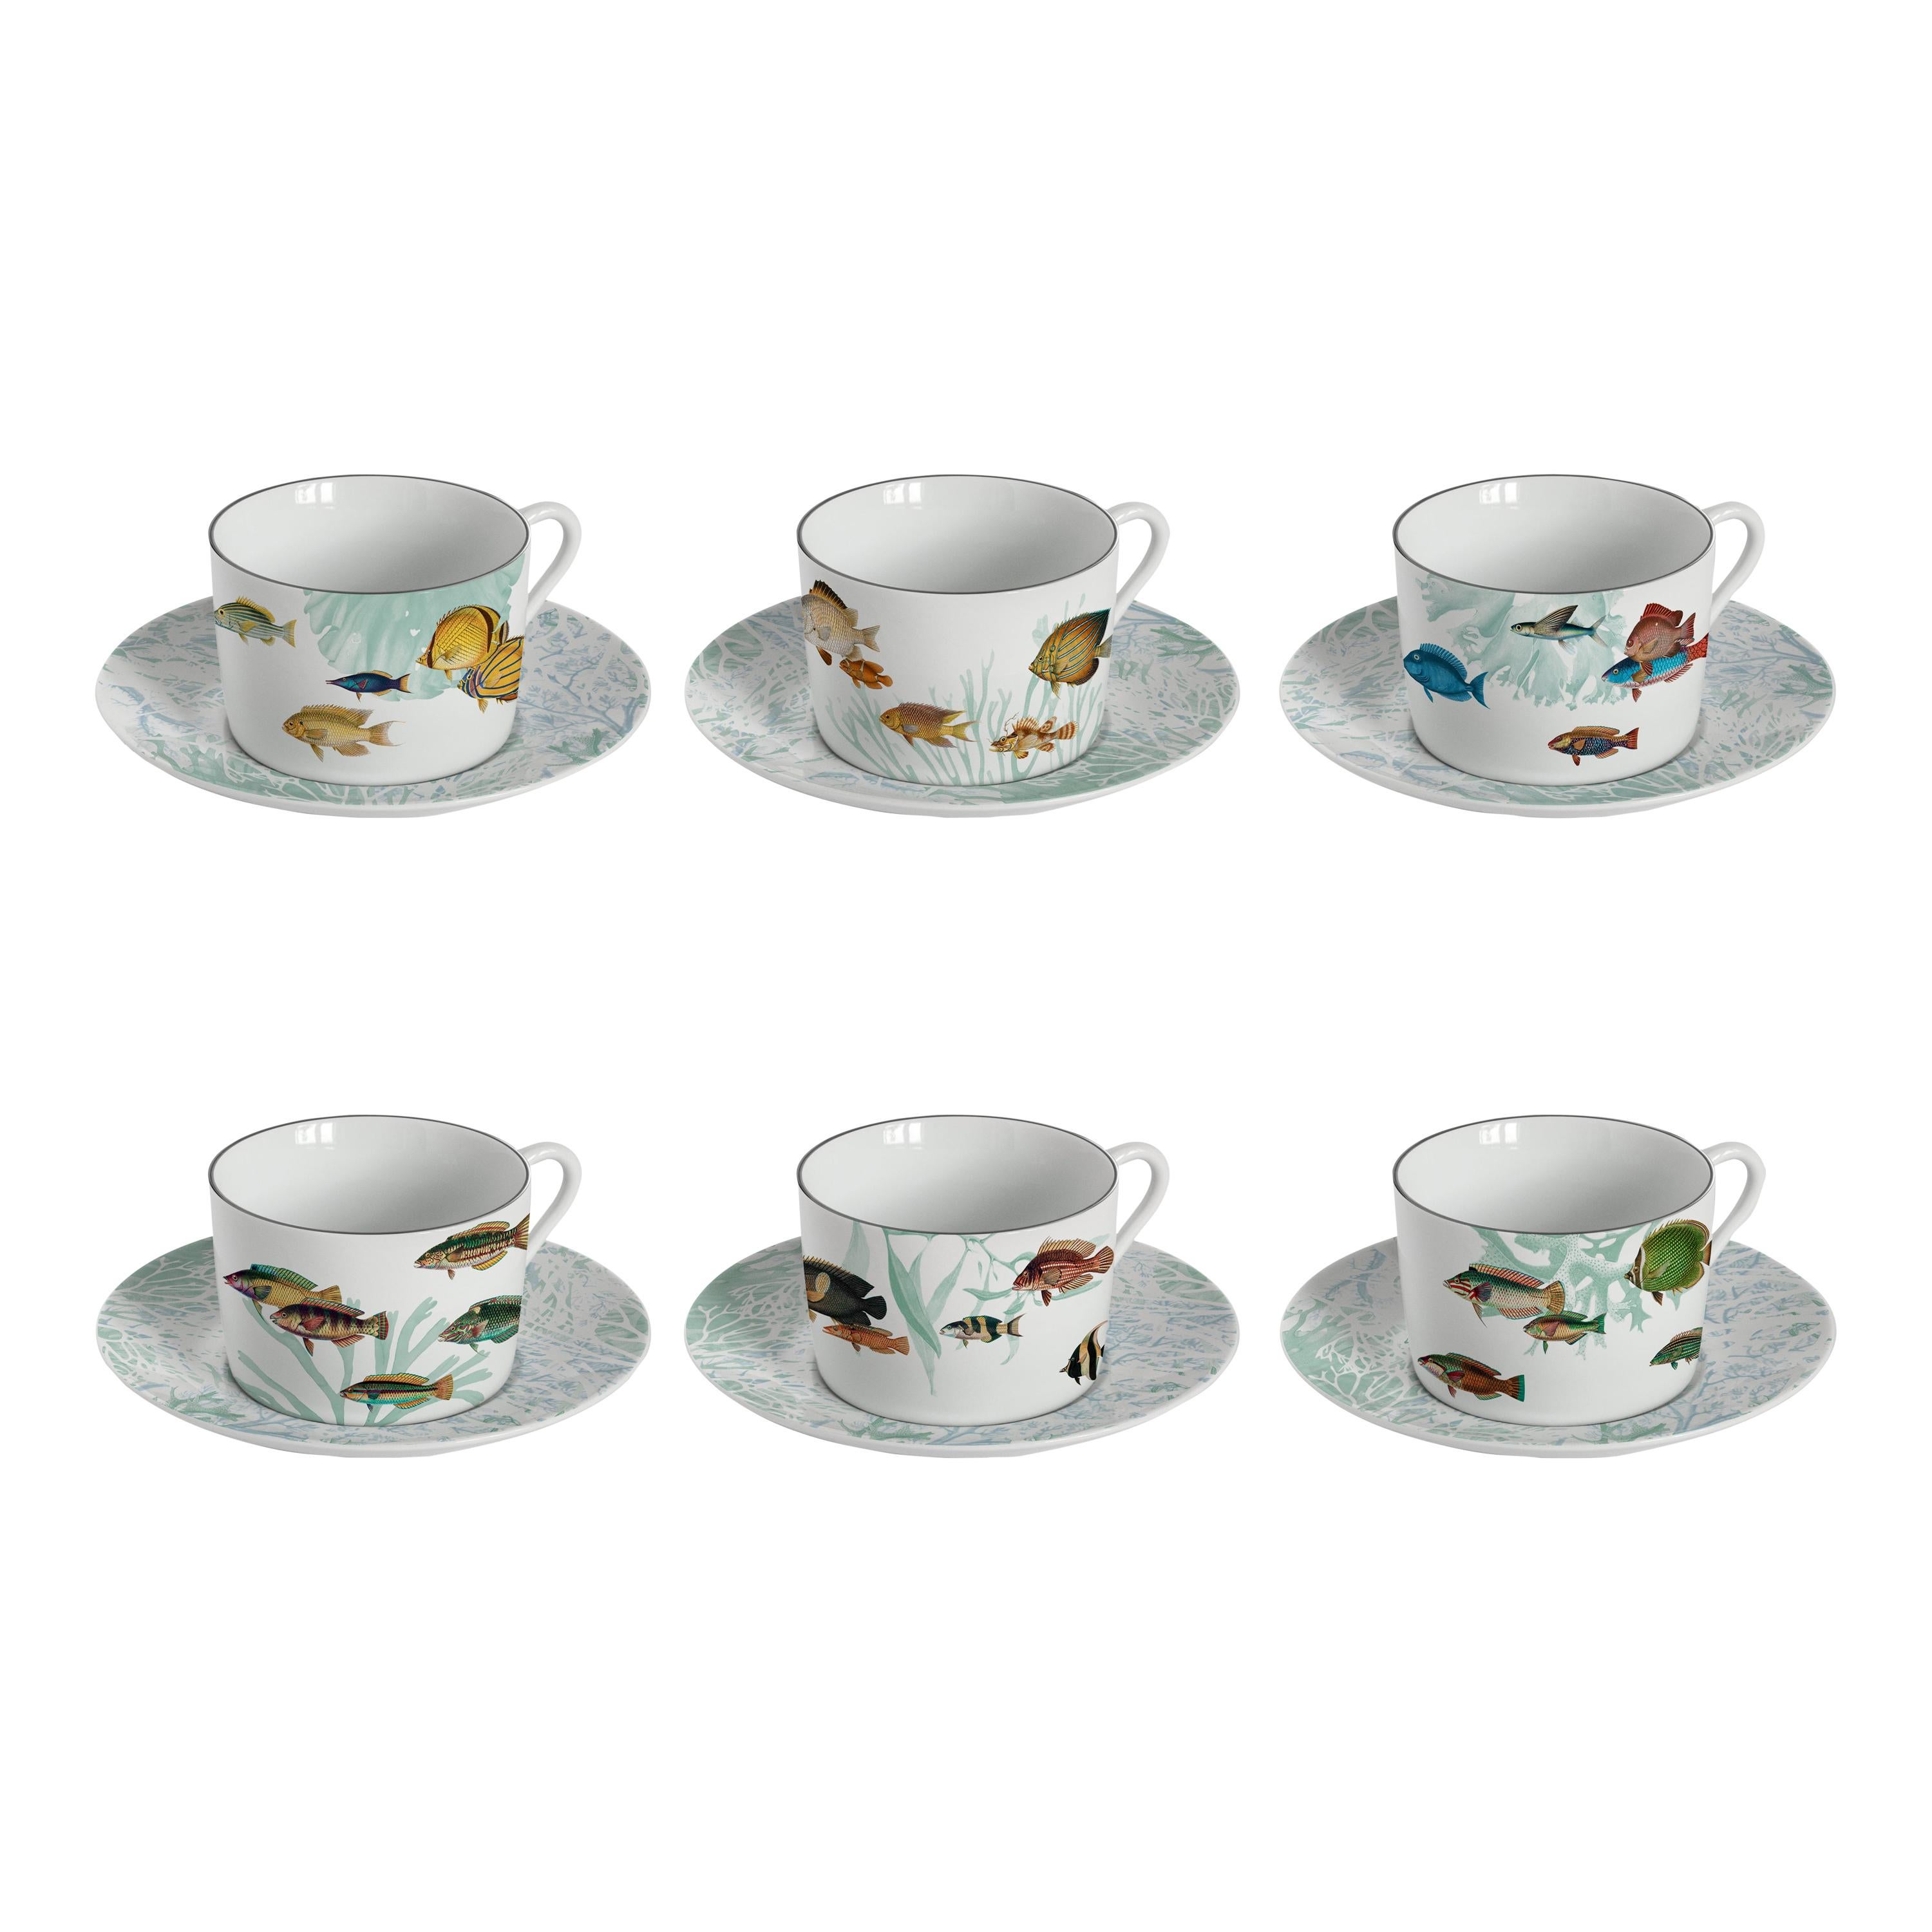 Amami, Tea Set with Six Contemporary Porcelains with Decorative Design For Sale